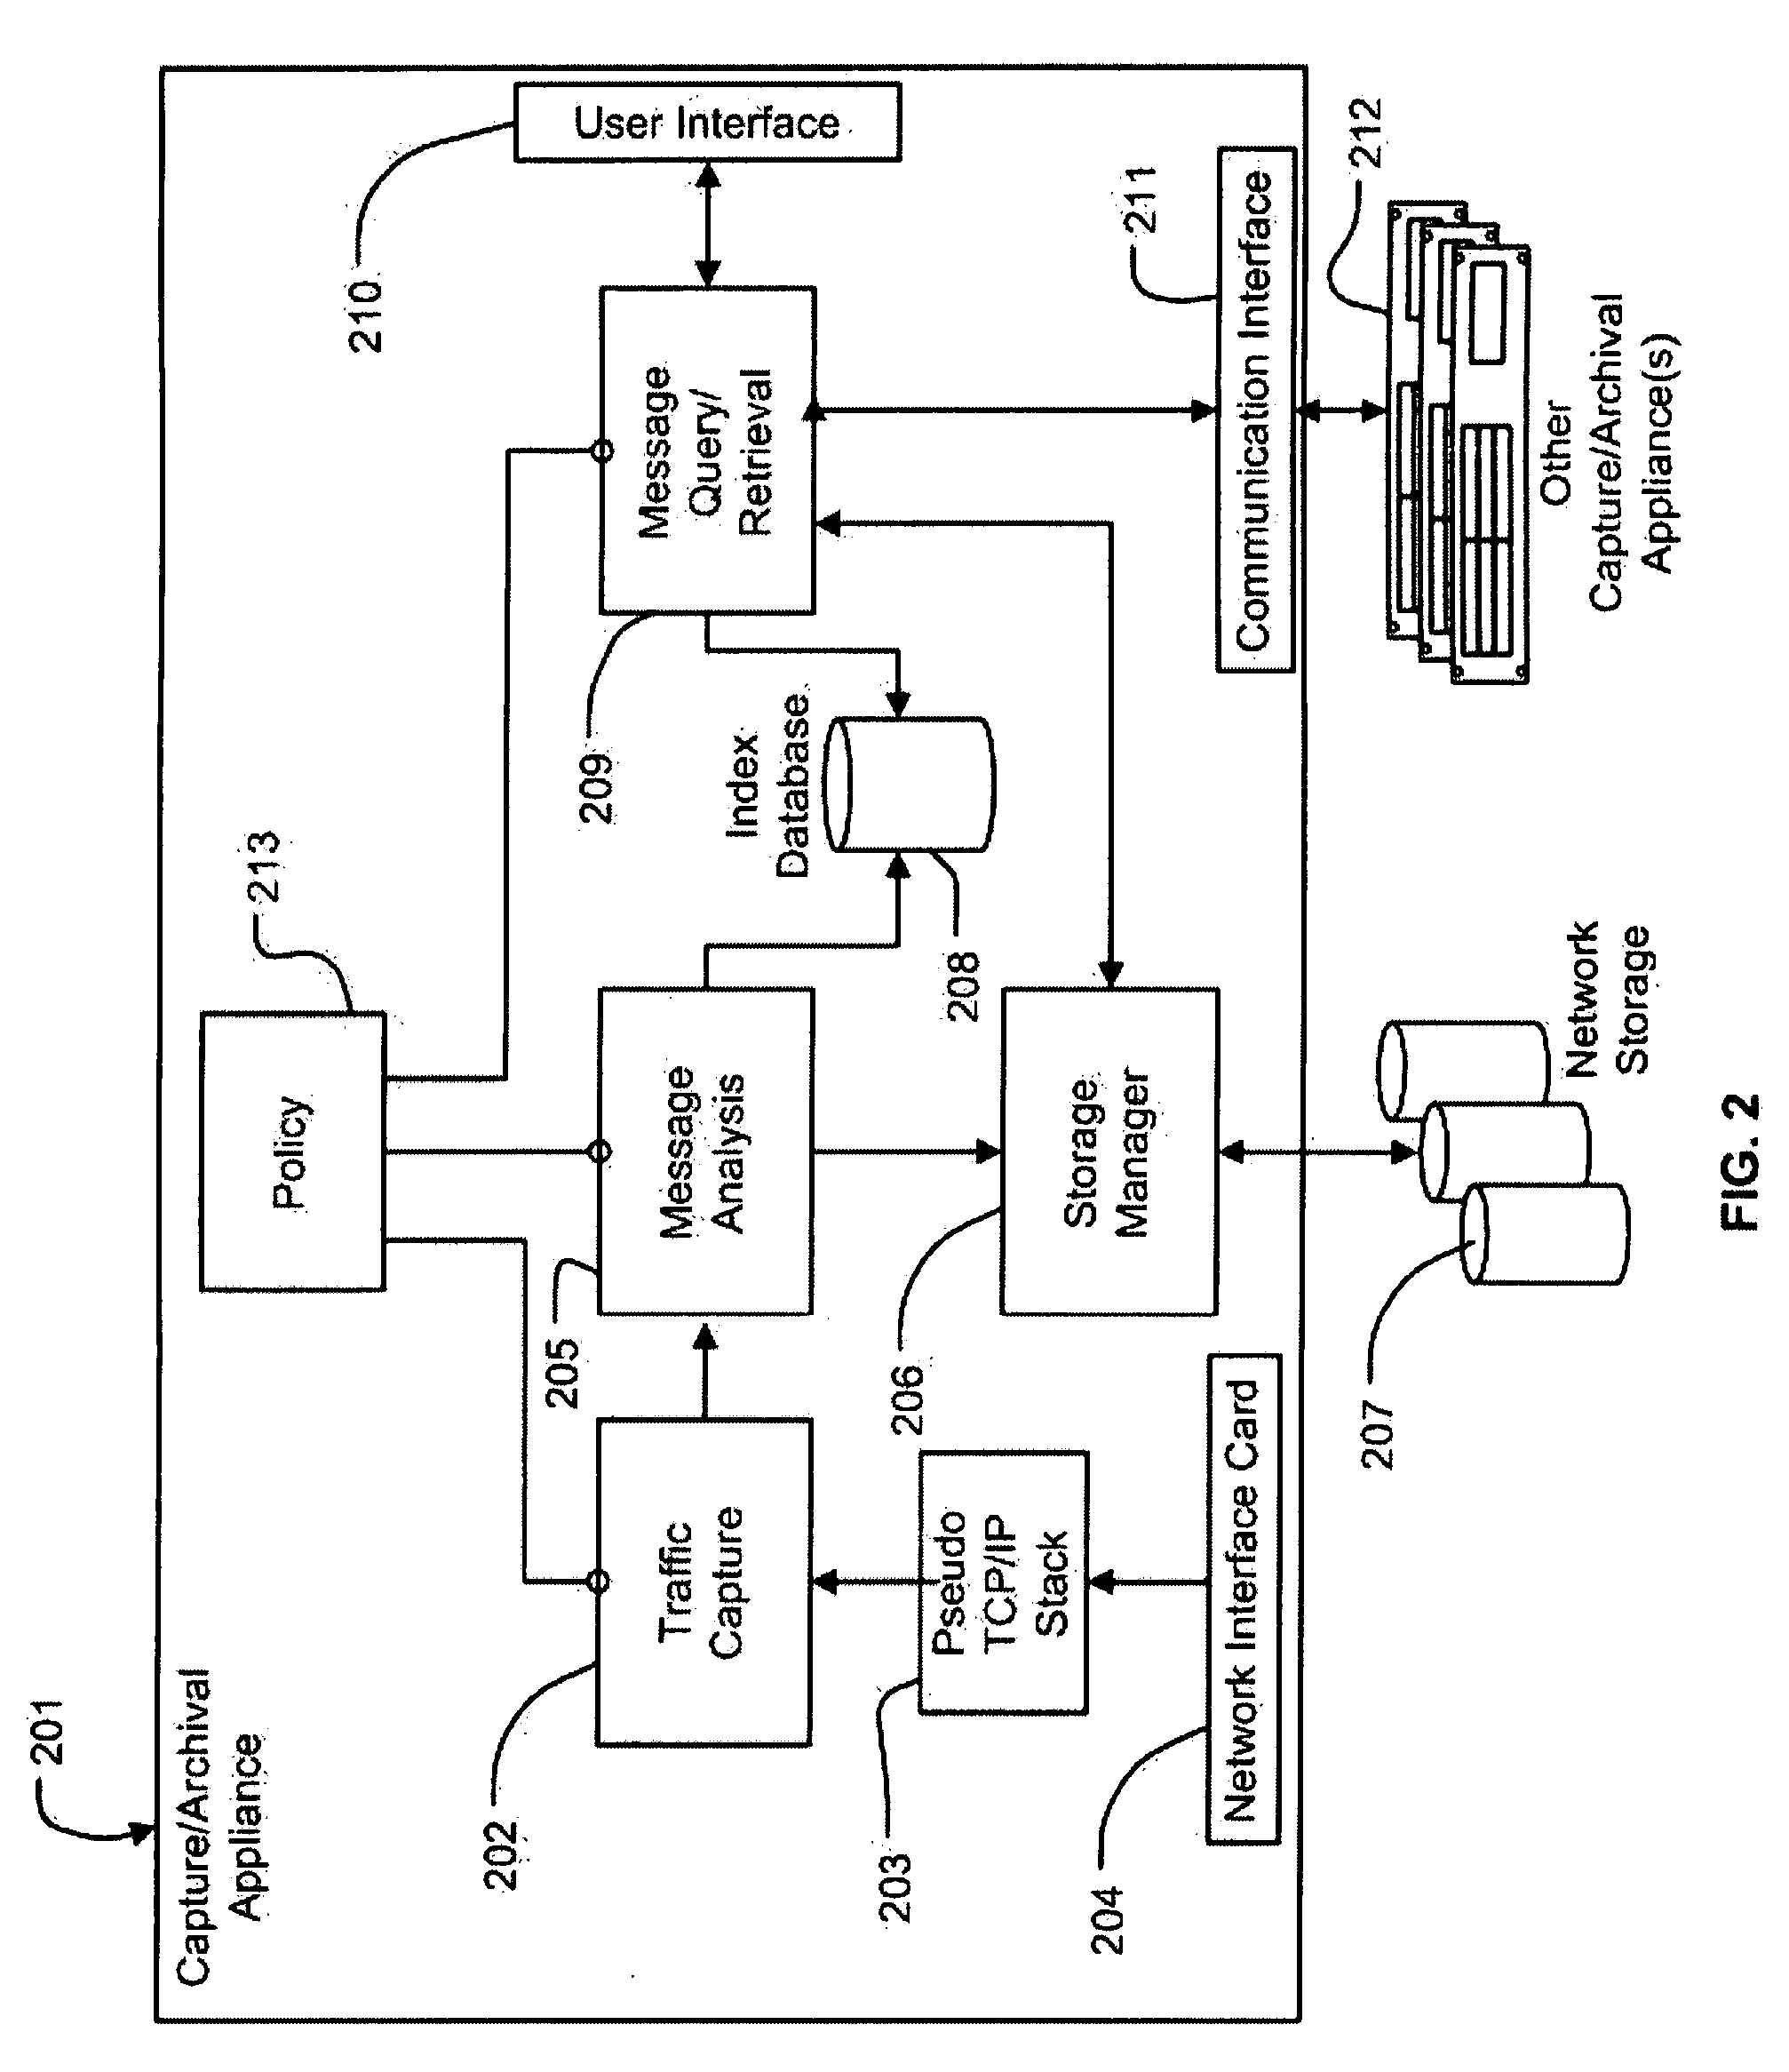 System and Method for the Capture and Archival of Electronic Communications